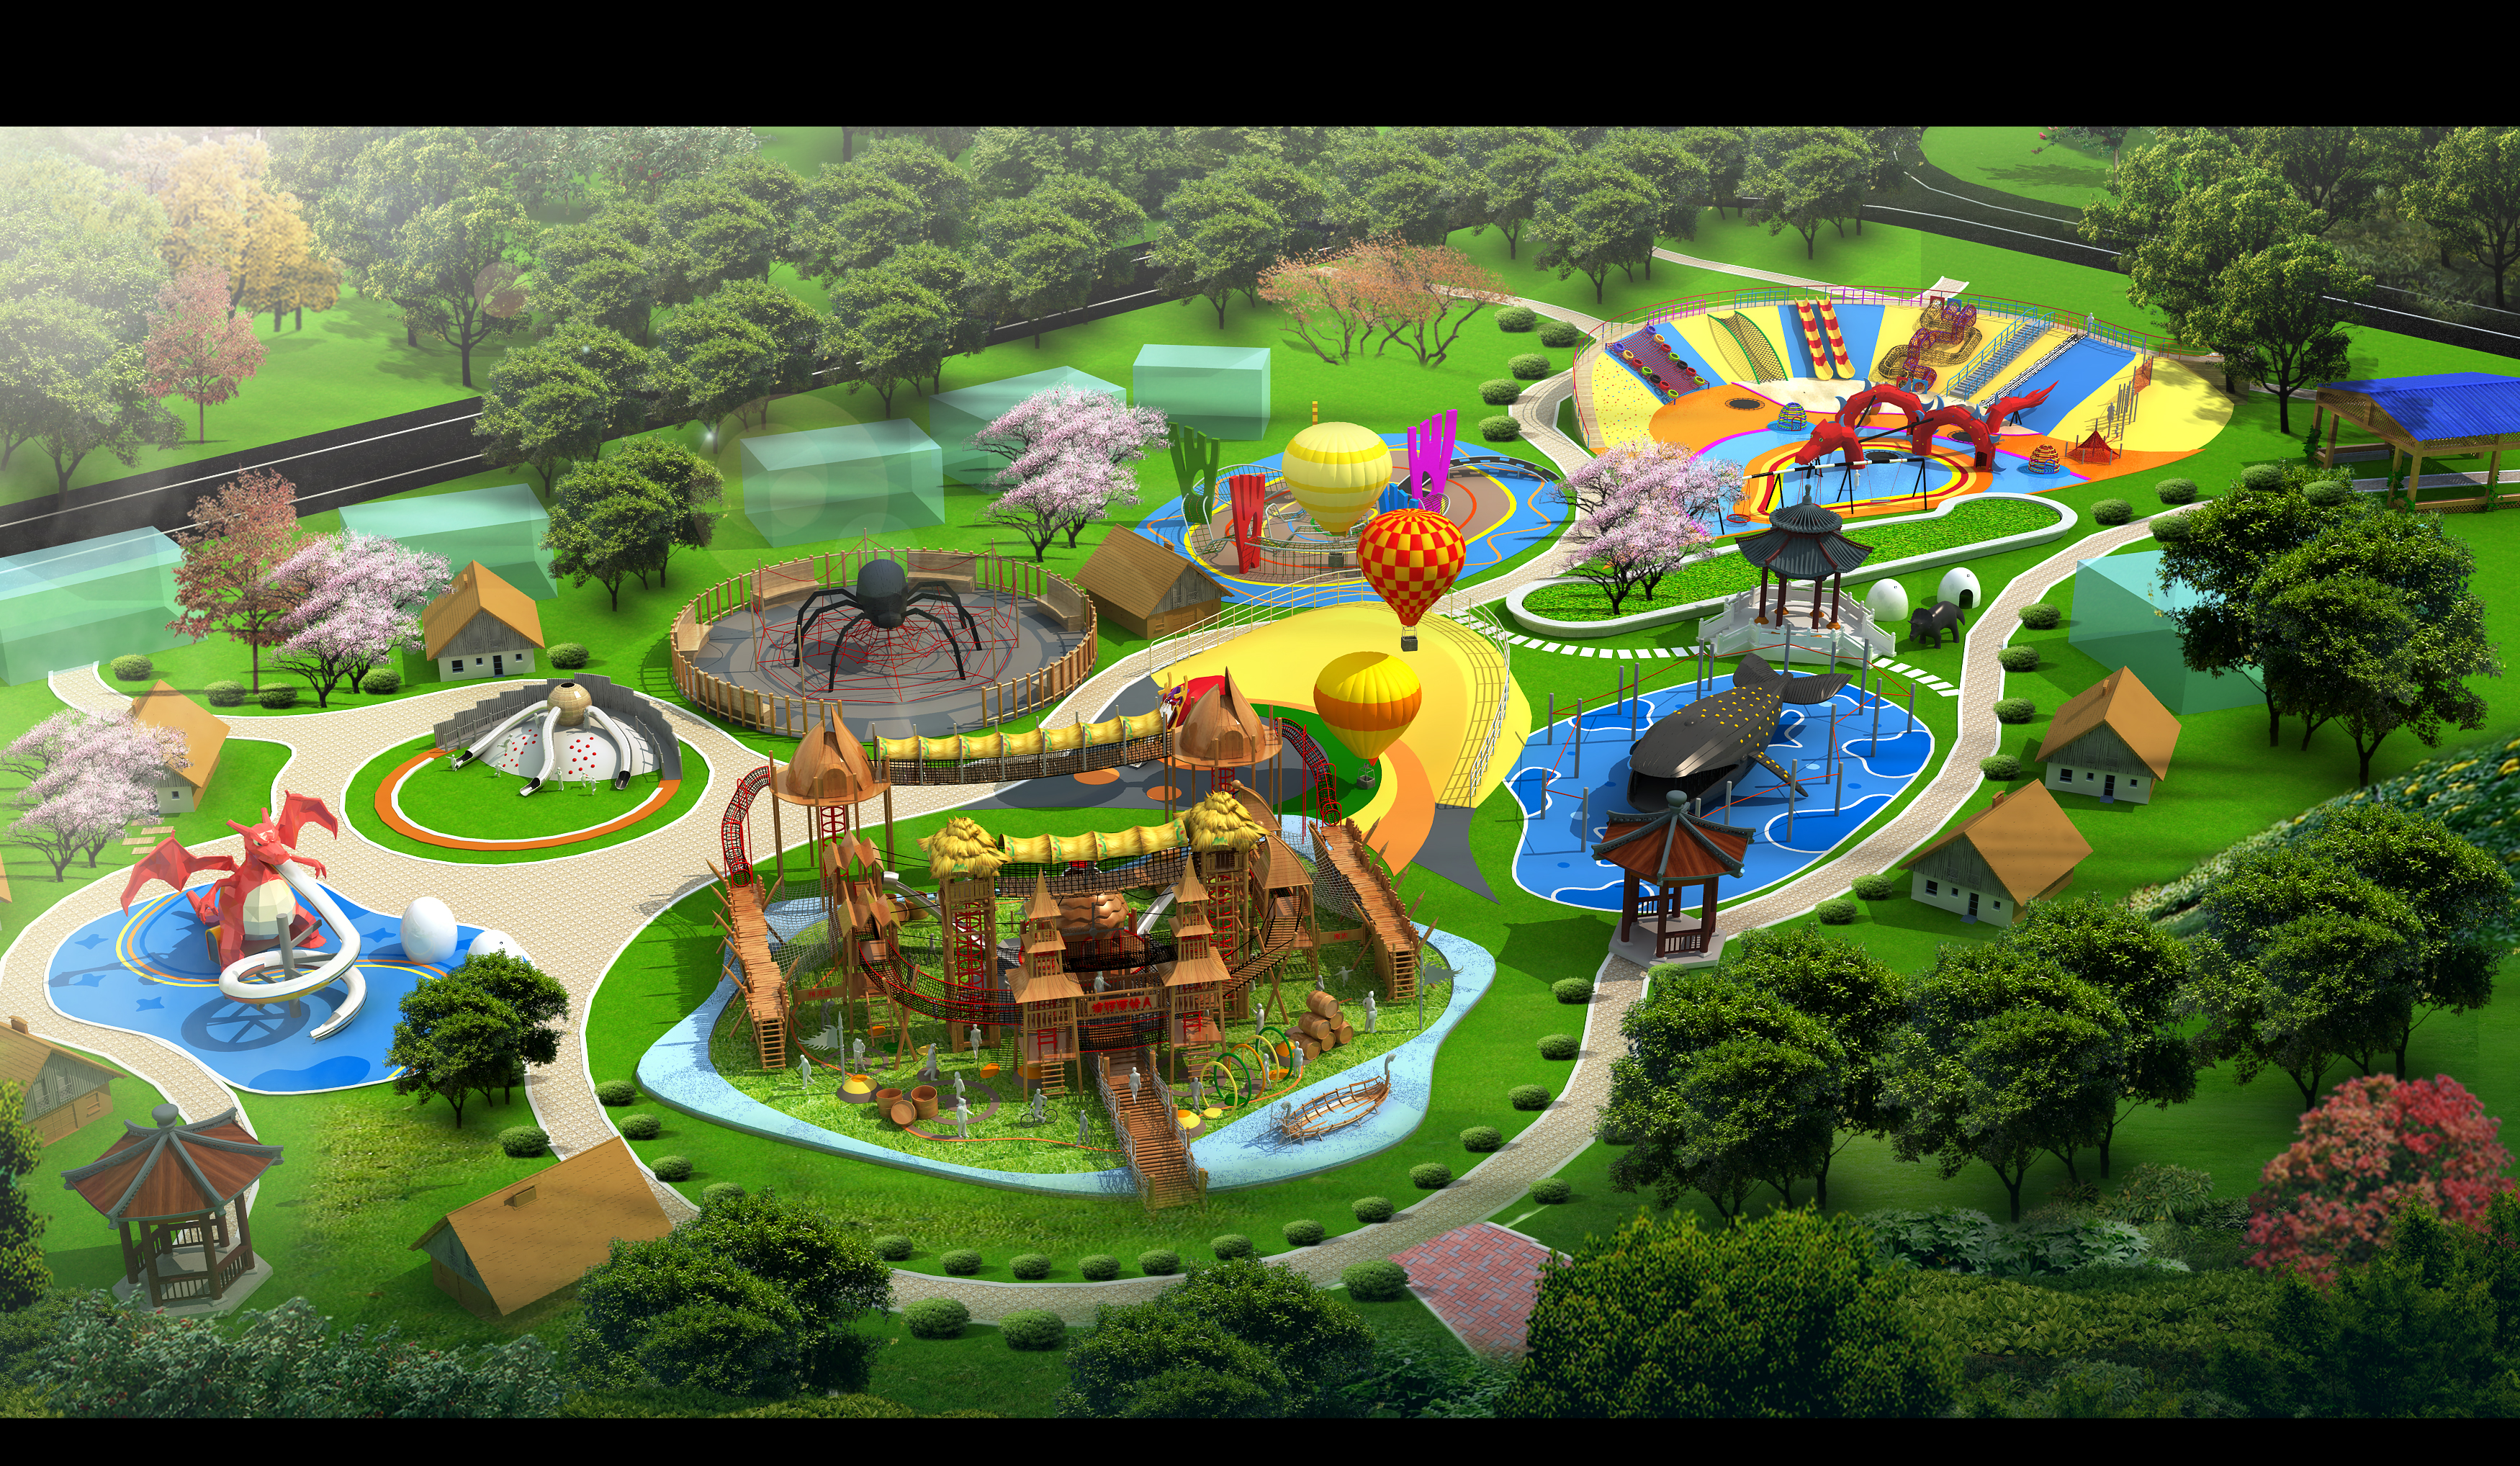 New amusement park design for yingshang, Anhui province